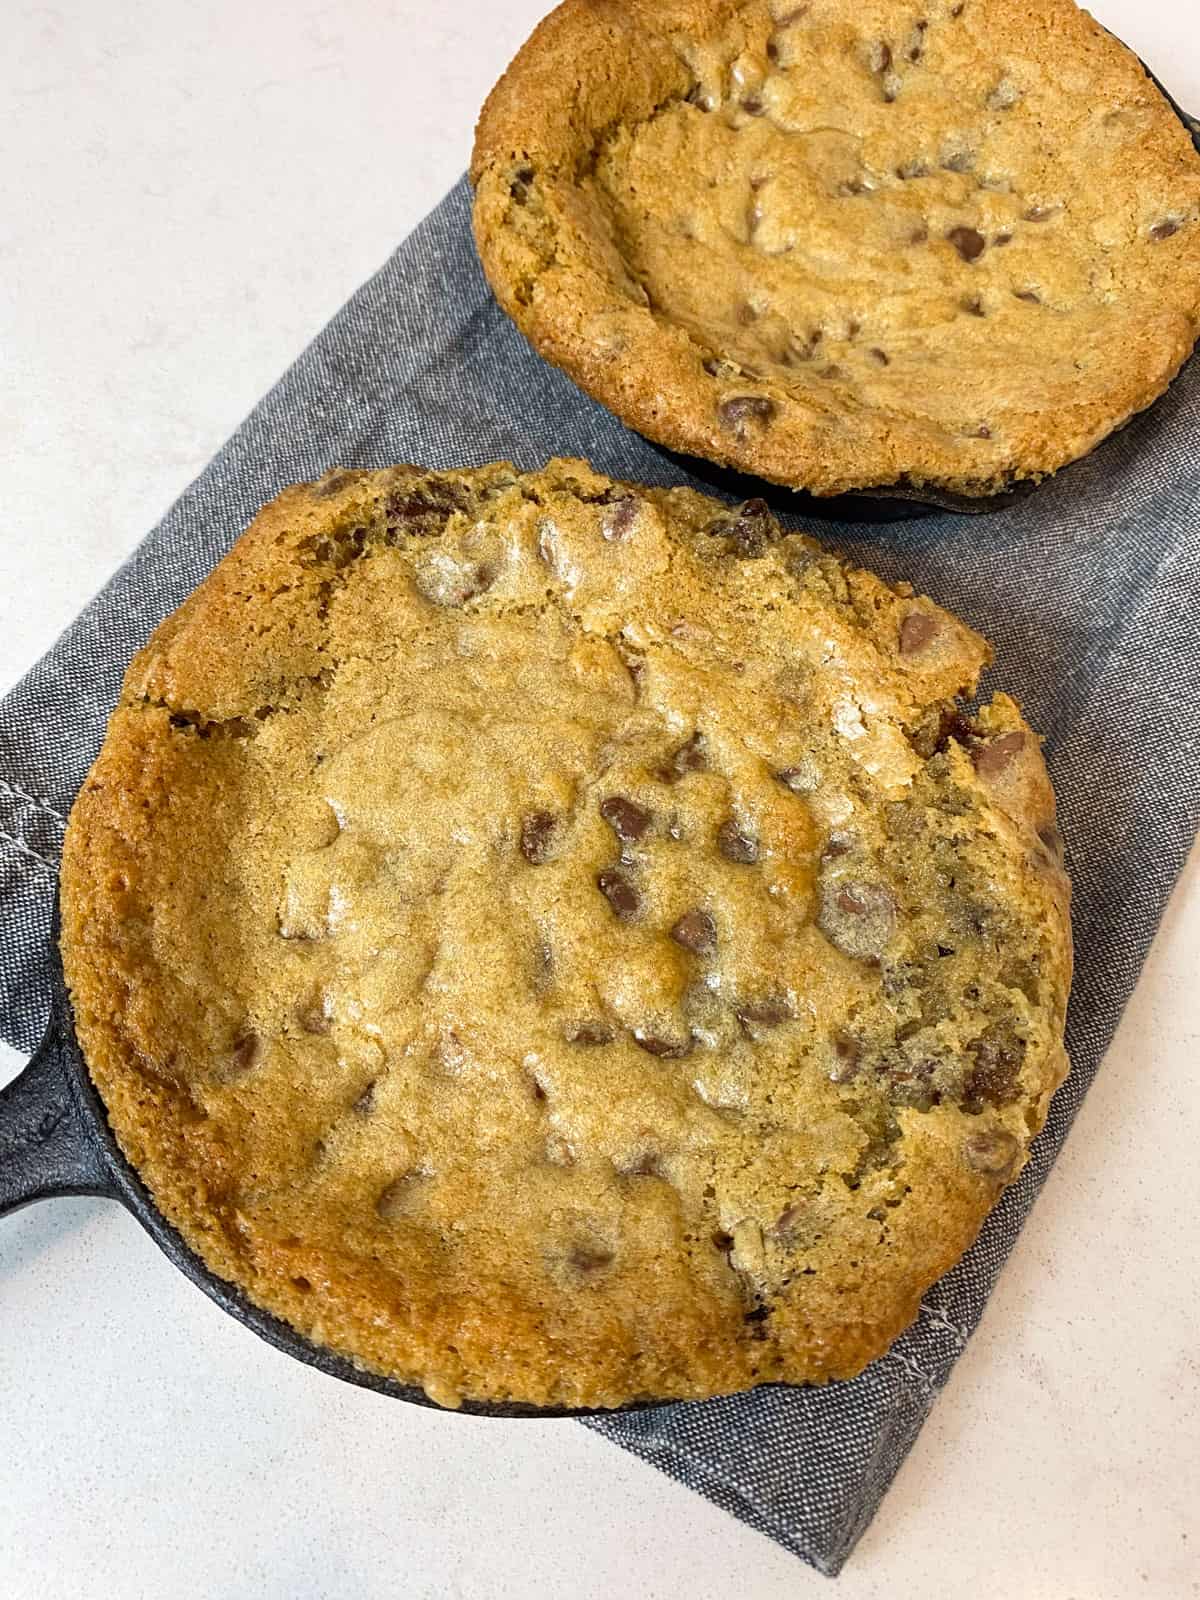 Bake the skillet cookie until golden brown and slightly gooey in the center.